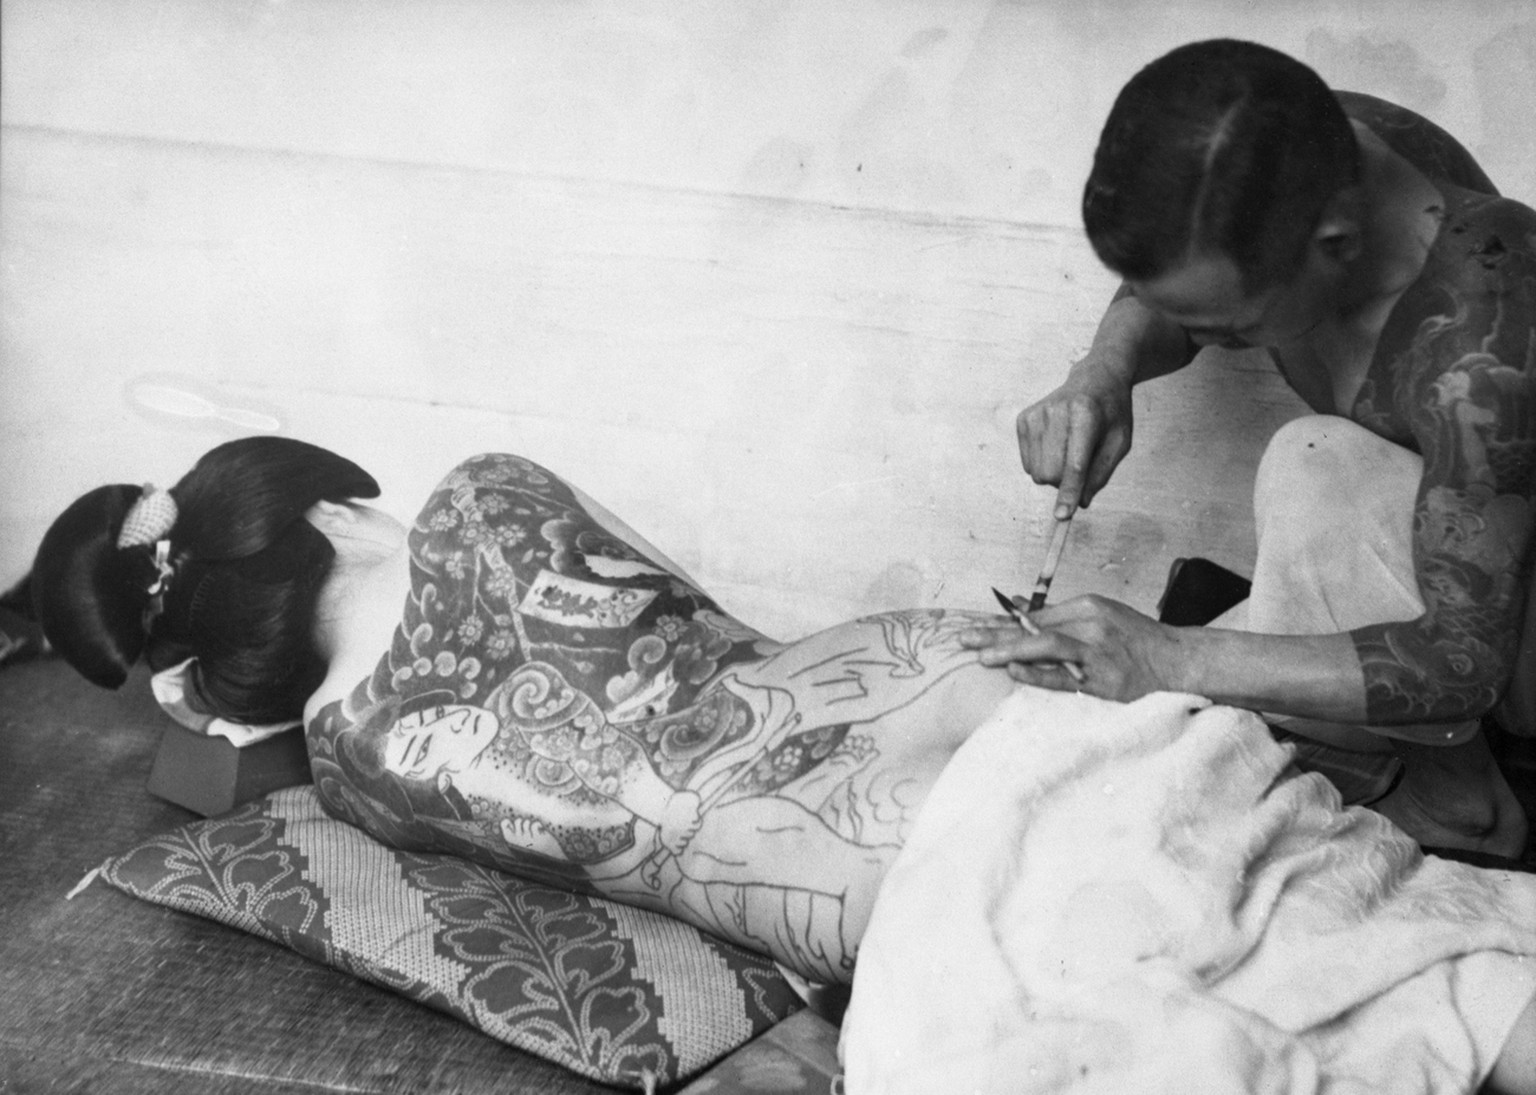 A tattoo artist traces work on a Japanese woman circa June 22, 1937. It often takes up to three years to complete a tattoo as large and detailed as this one. (AP Photo)